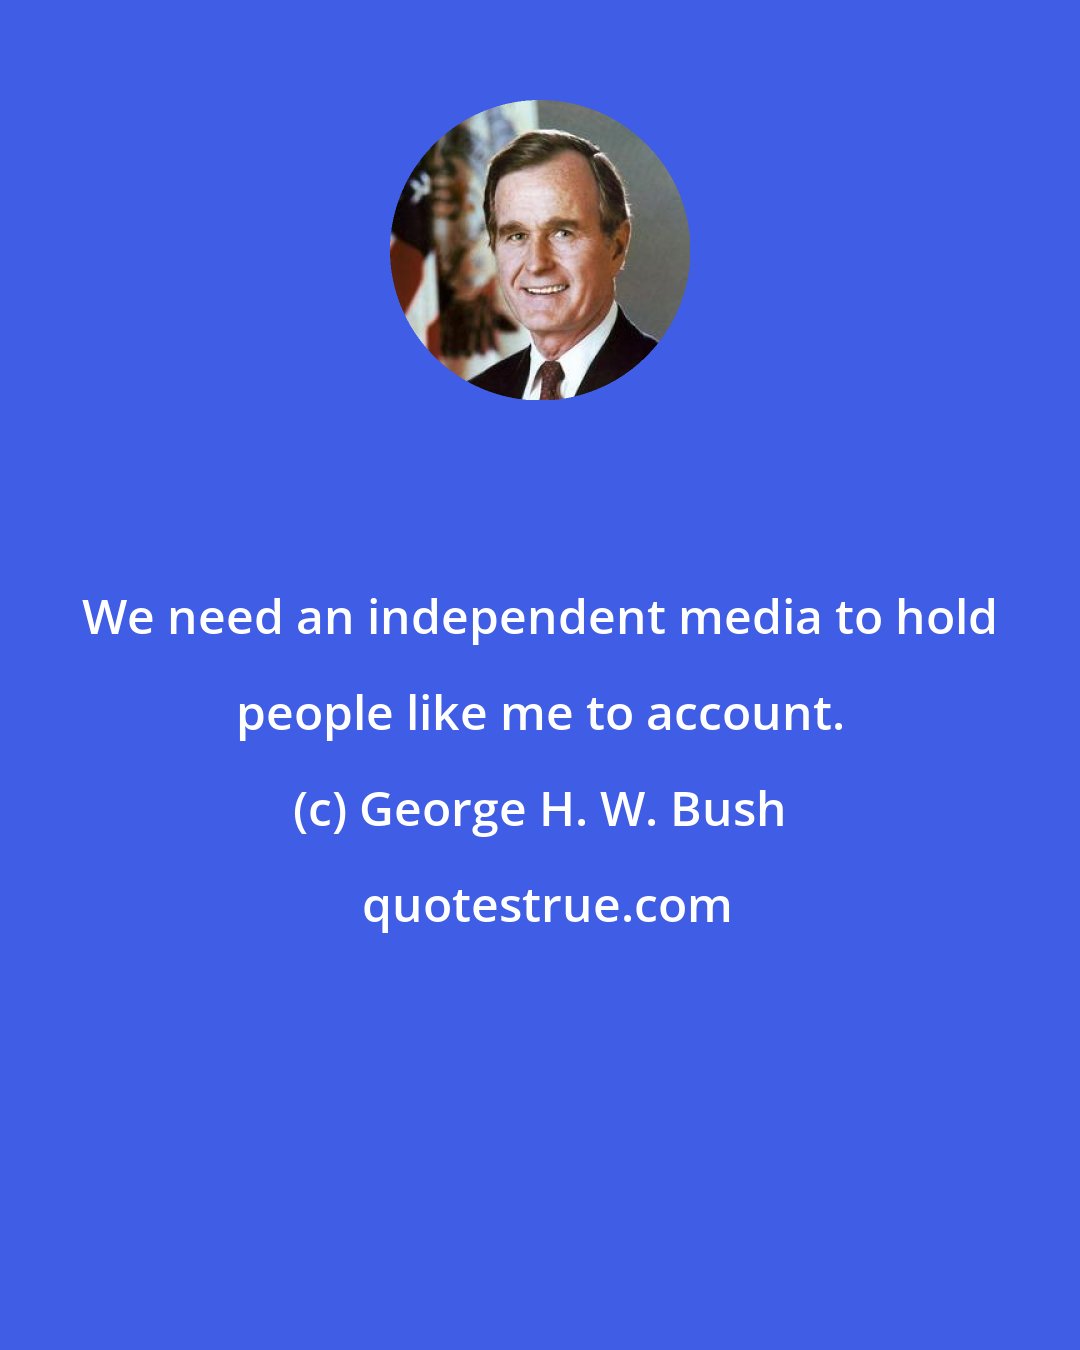 George H. W. Bush: We need an independent media to hold people like me to account.